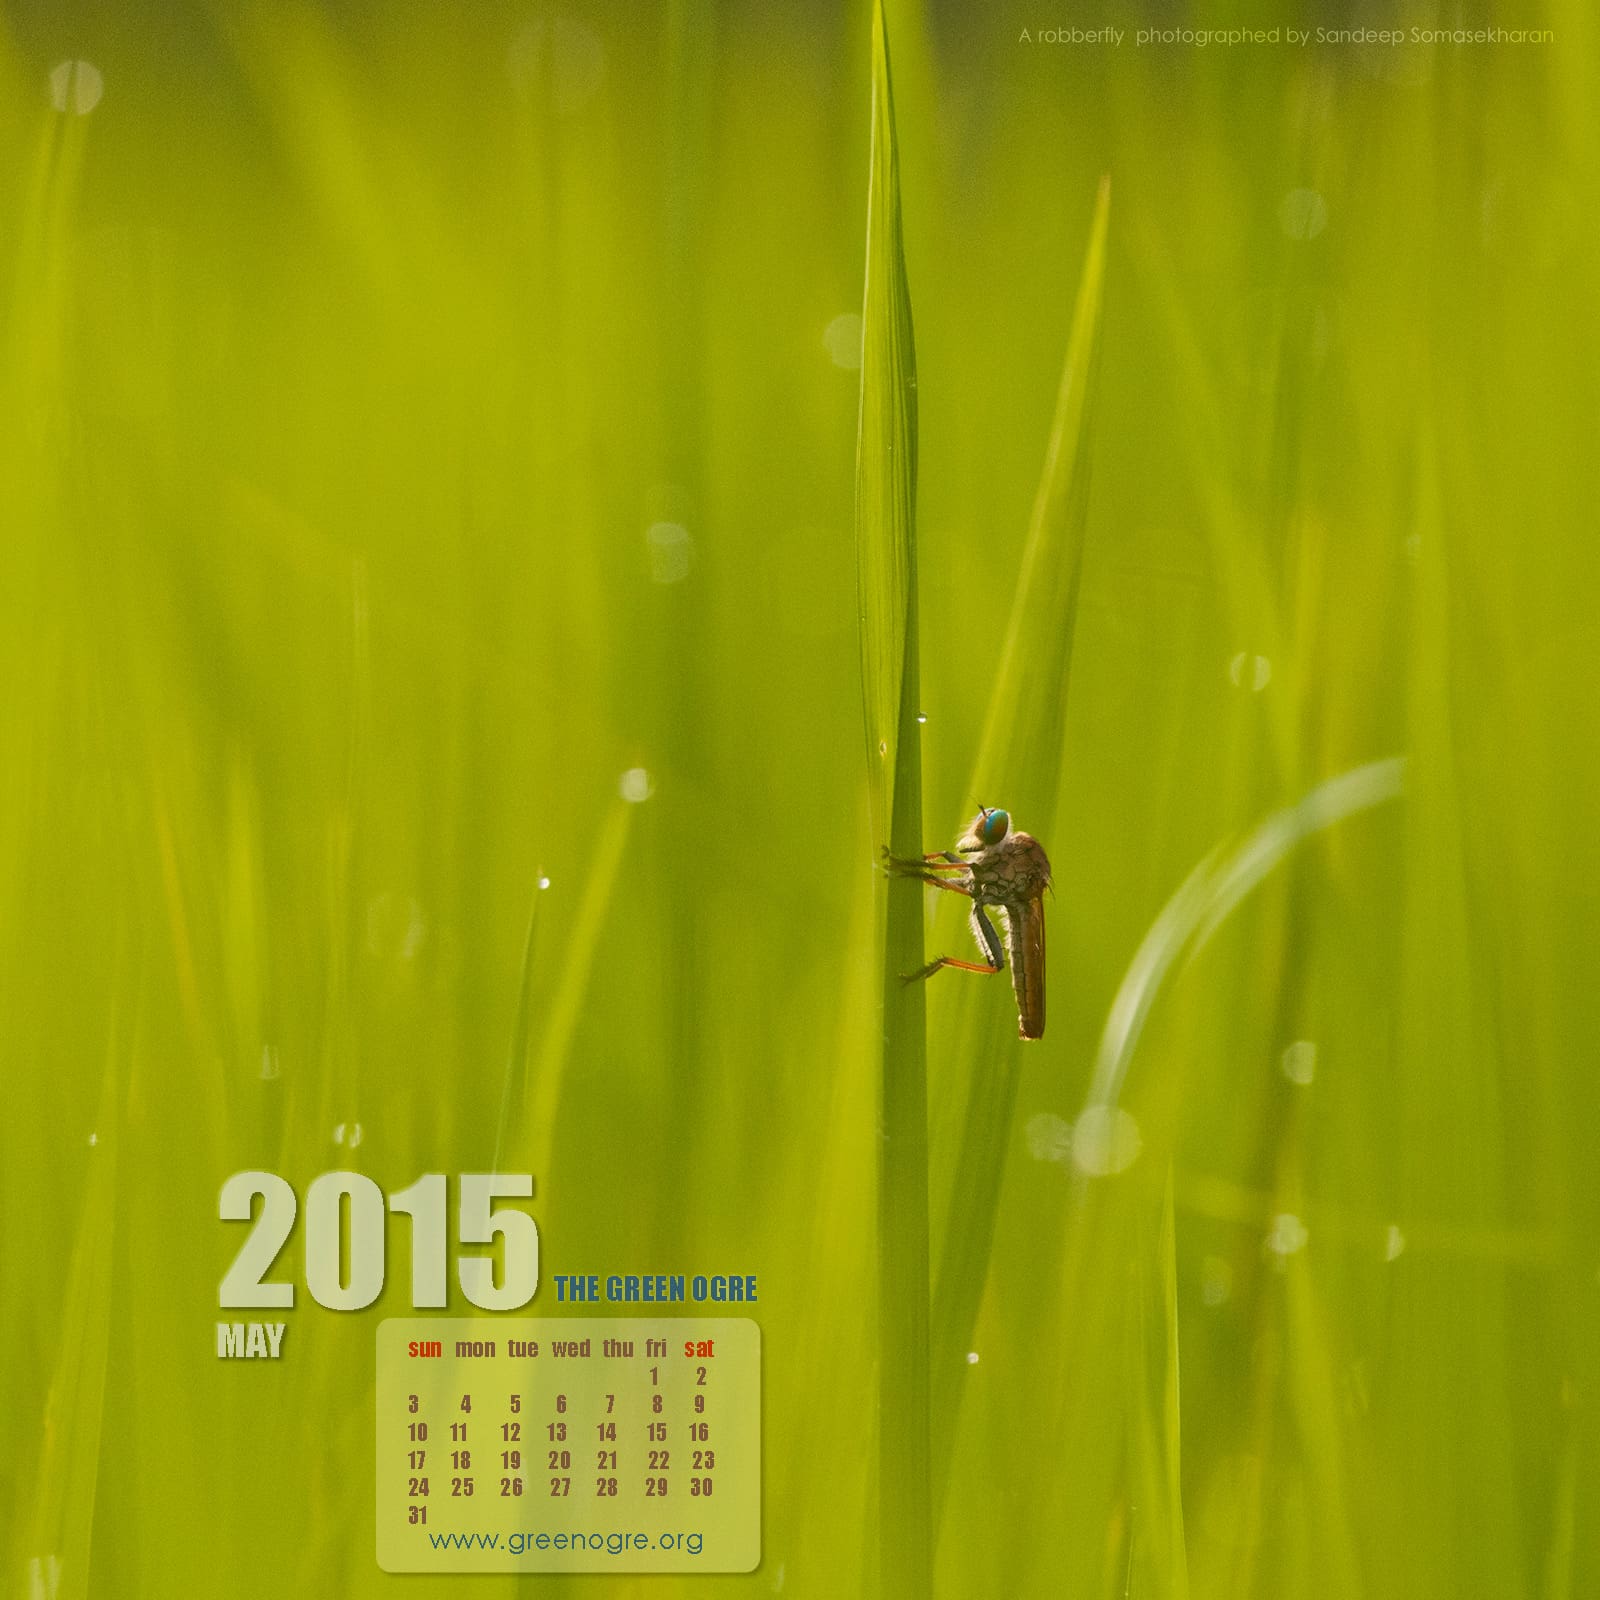 Download the May 2015 wallpaper for your iPad screen